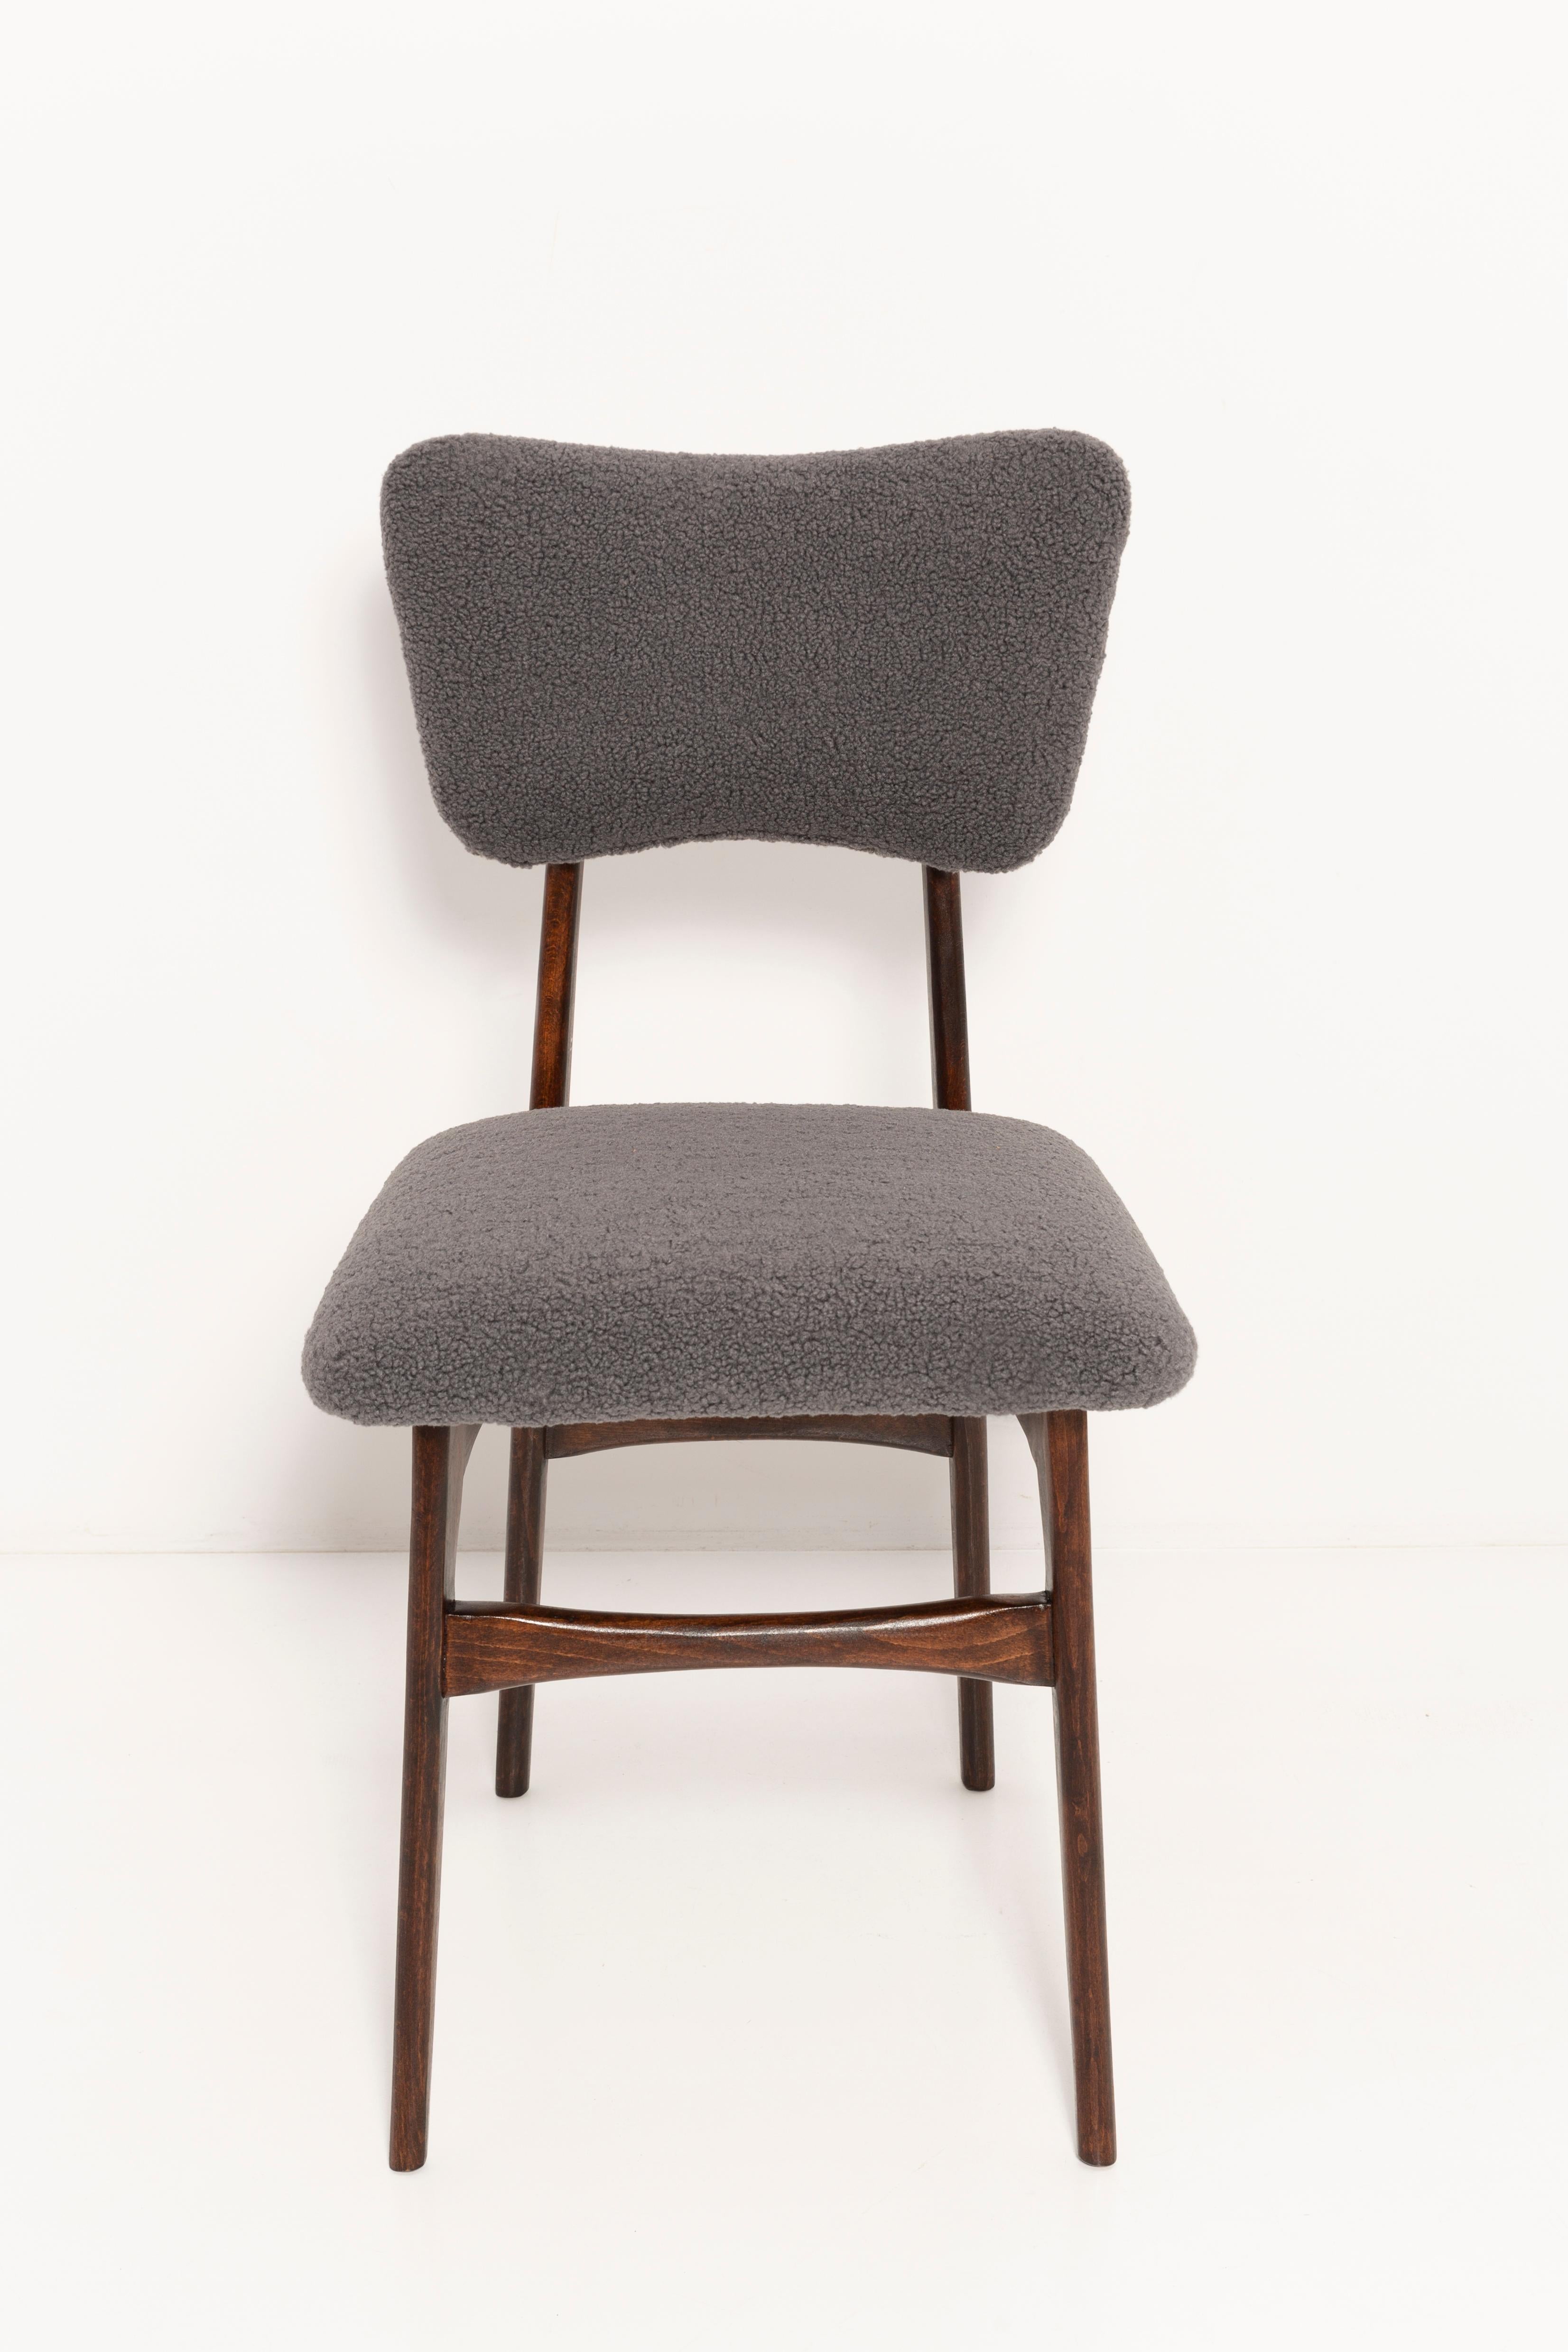 Set of Eight 20th Century Dark Gray Boucle Chairs, Europe, 1960s For Sale 5